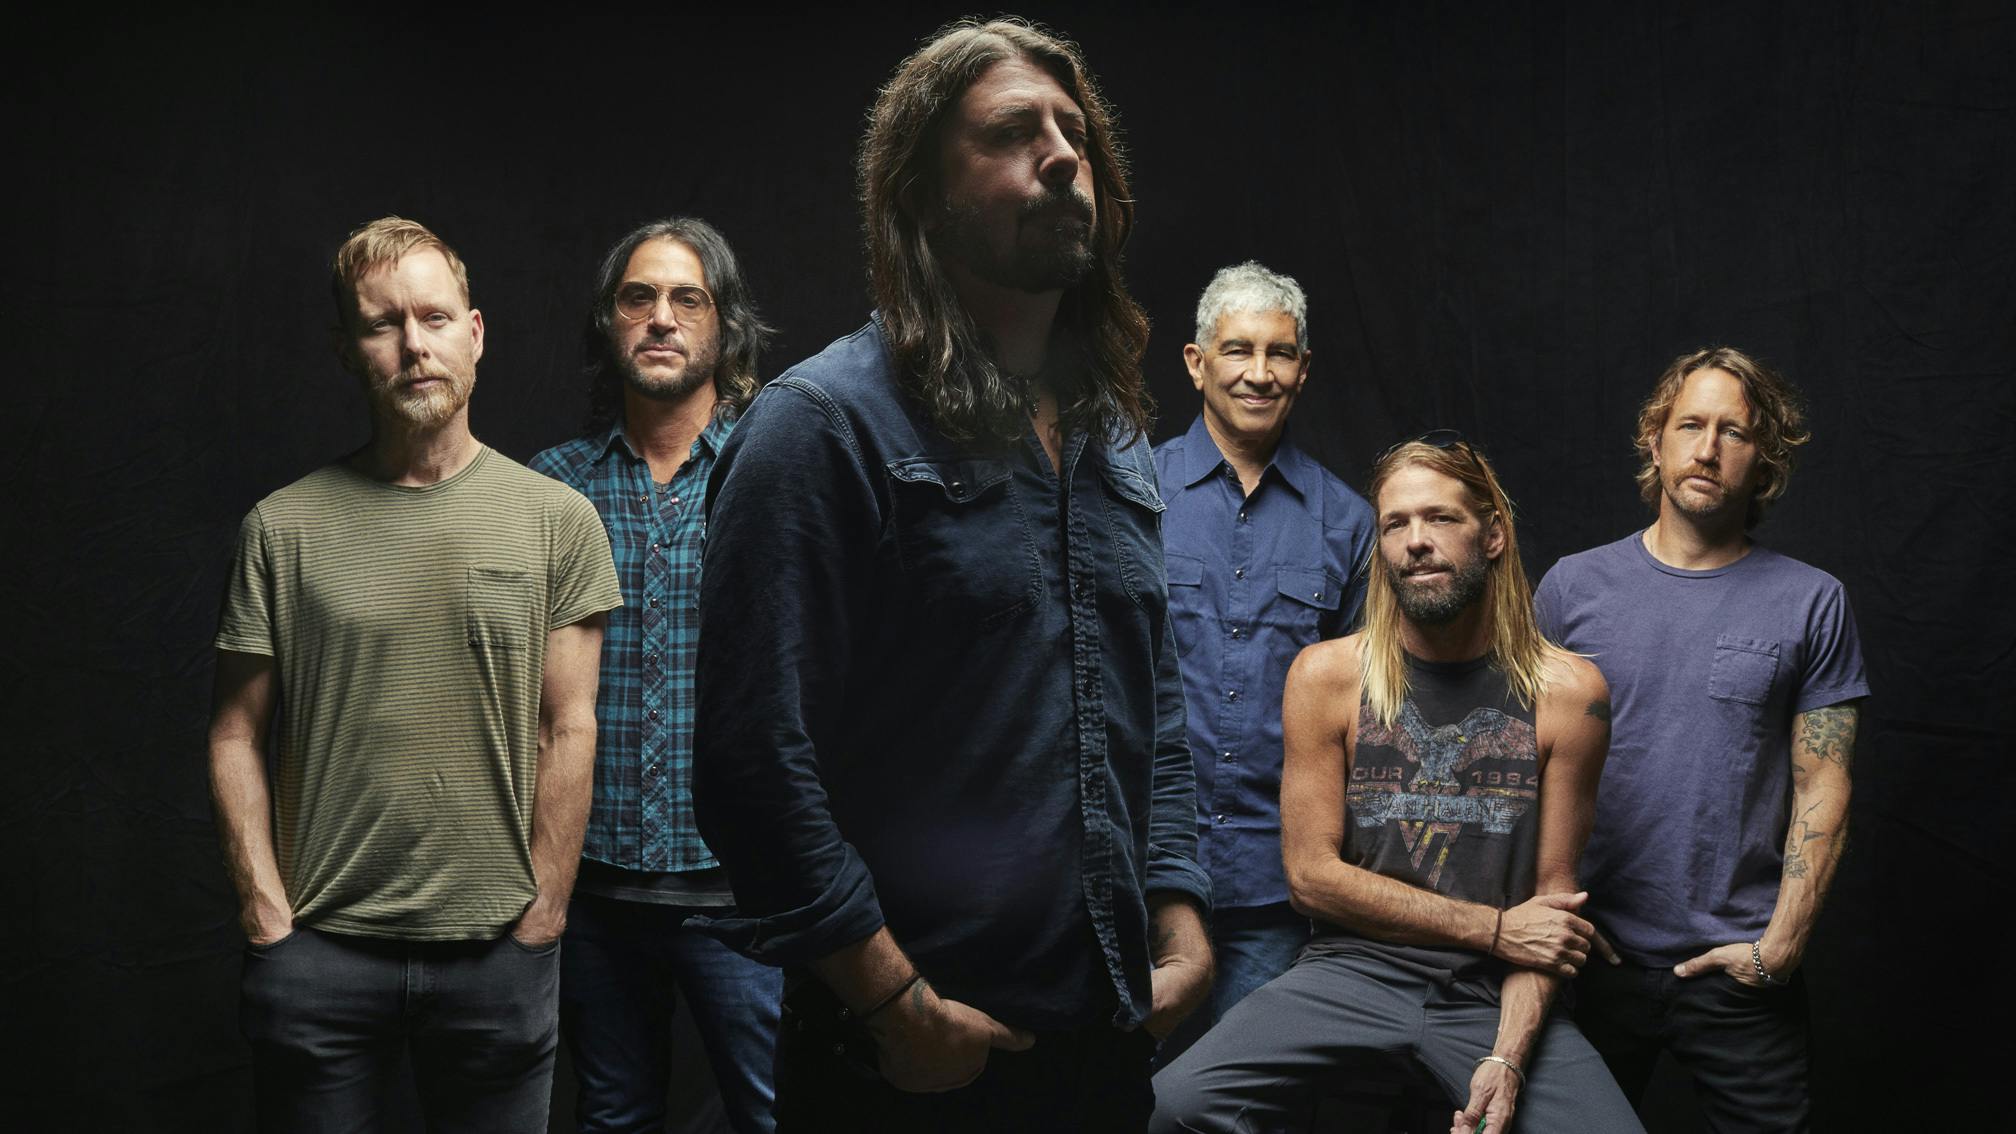 Foo Fighters announce first wave of guests for Taylor Hawkins tribute gig in London